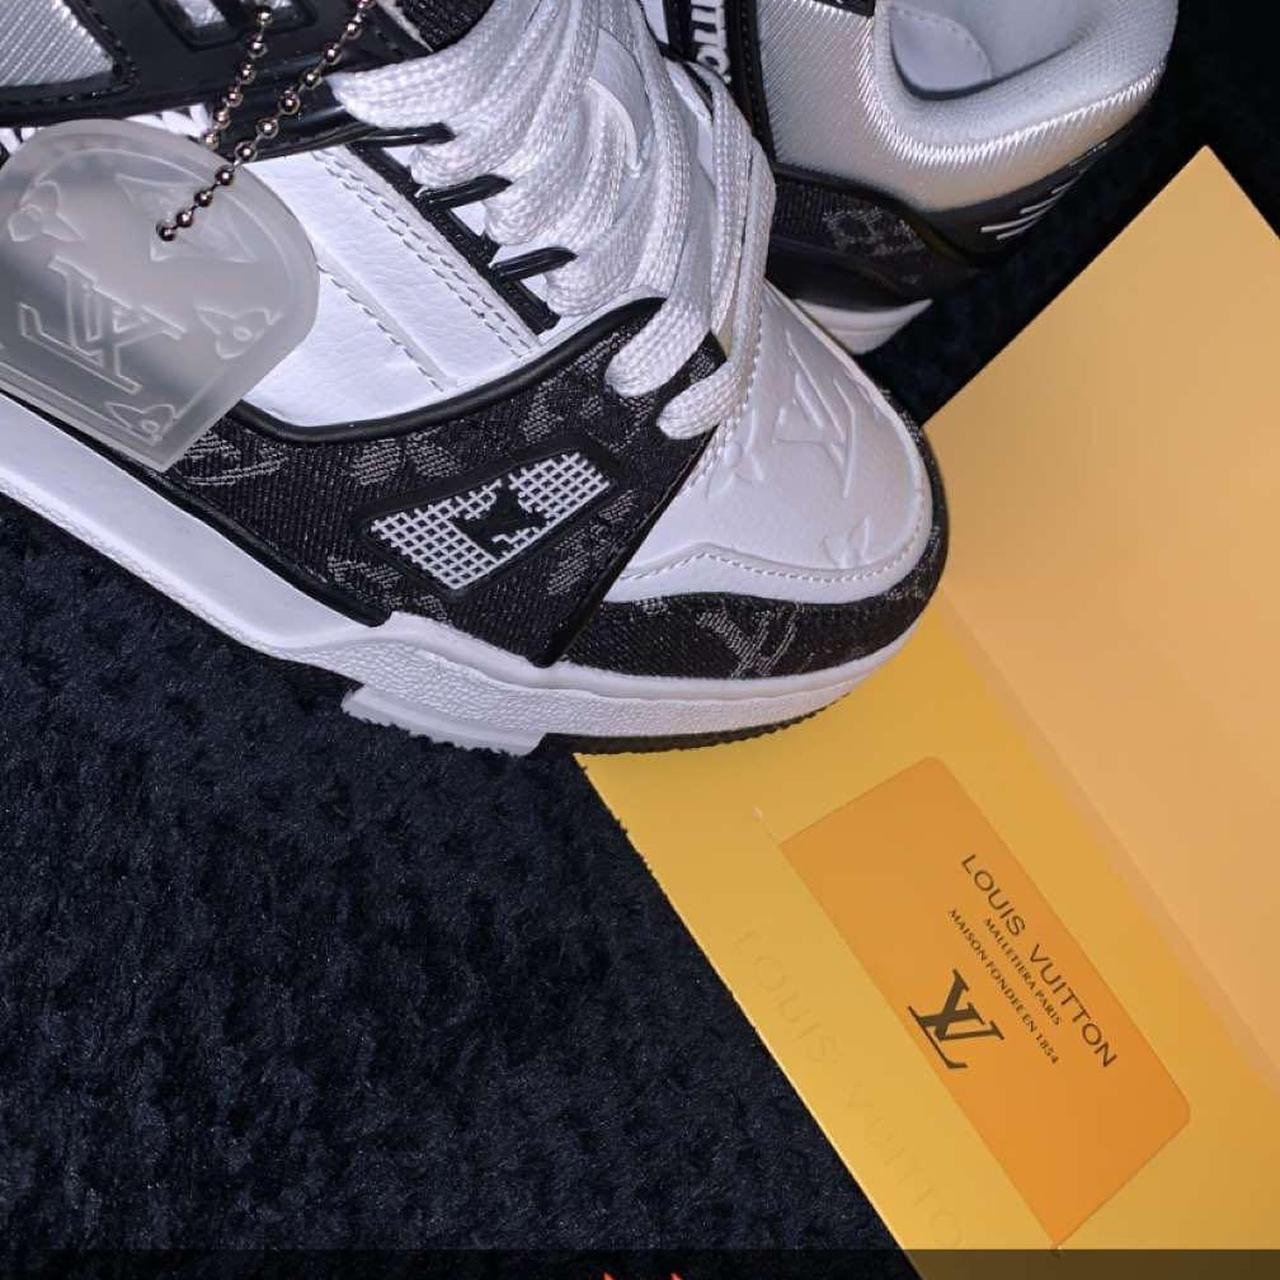 Louis vuitton trainers, size 6 worn a handful of - Depop